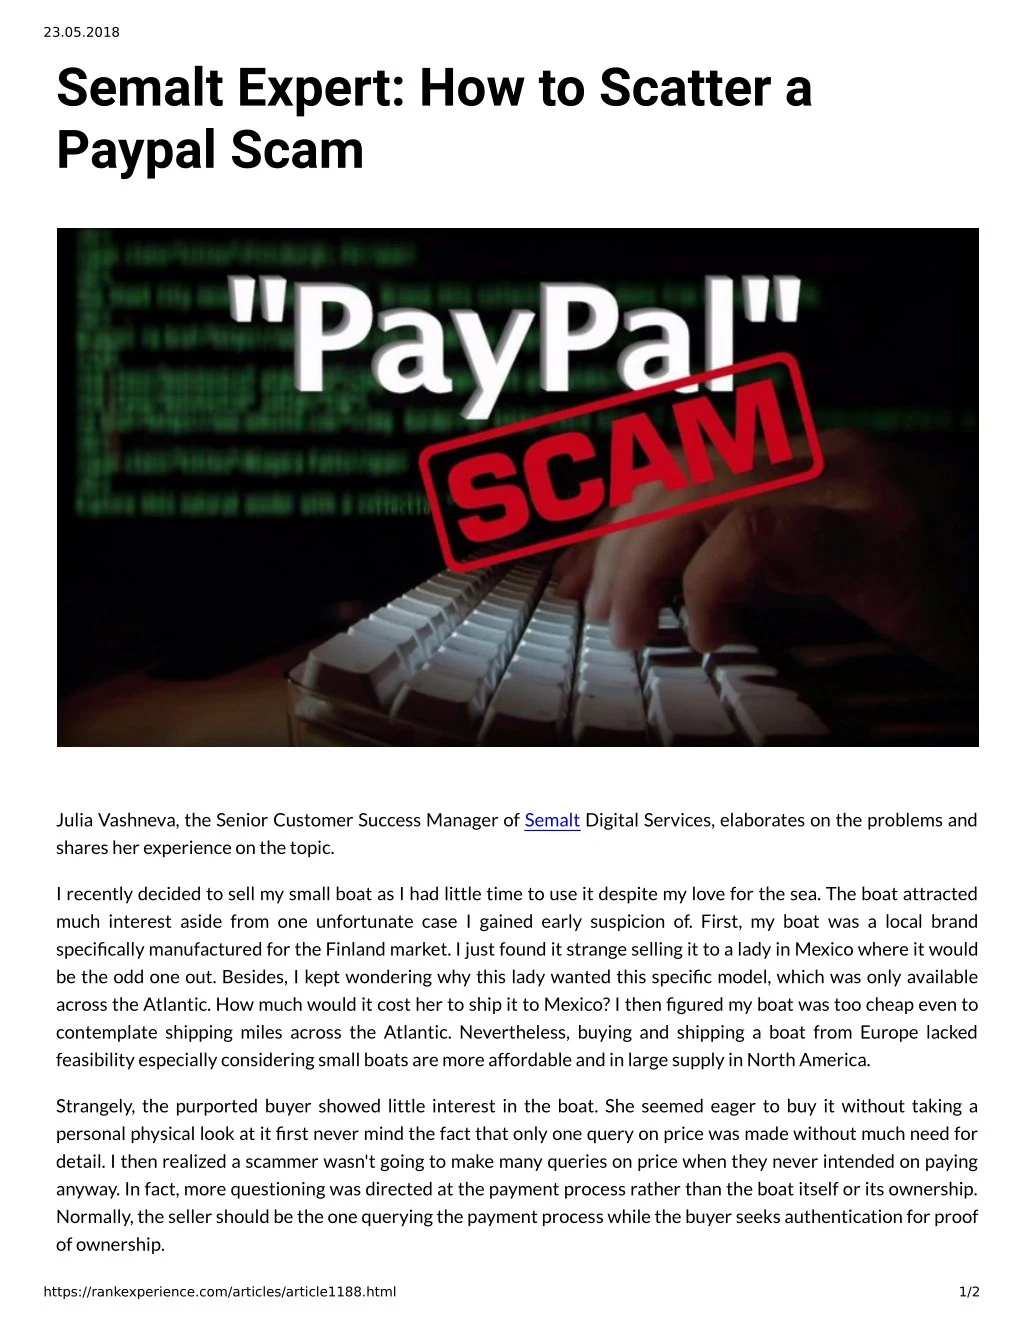 23 05 2018 semalt expert how to scatter a paypal